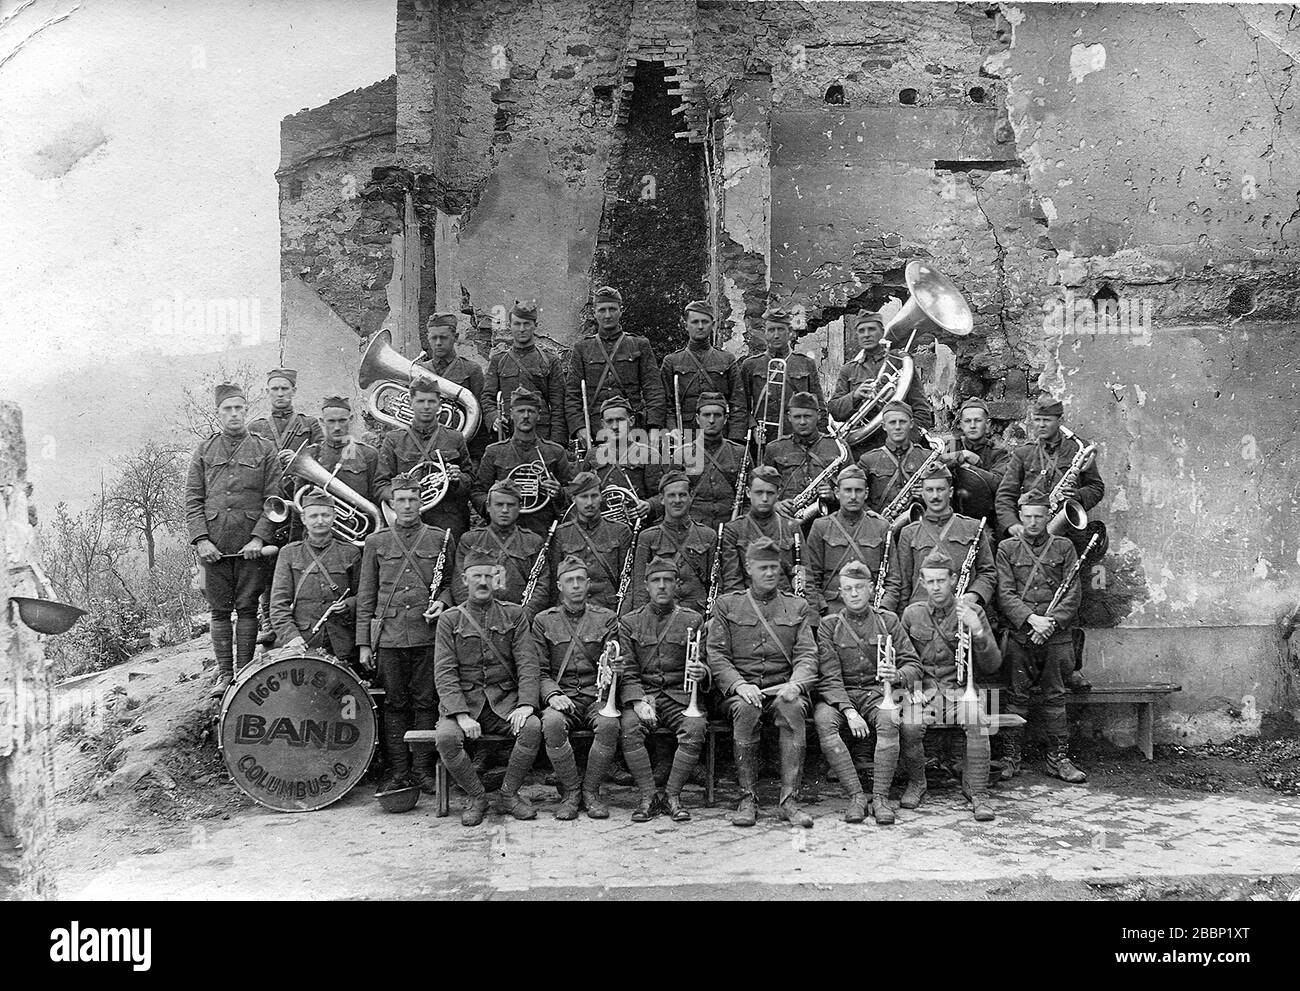 A wartime photo of the 166th Infantry Regiment Band taken in France. April 6 commemorates the 100th anniversary of the U.S. entry into World War I.  (Maj. Gen. Benson Hough Collection/Ohio Army National Guard Historical Collections) Stock Photo